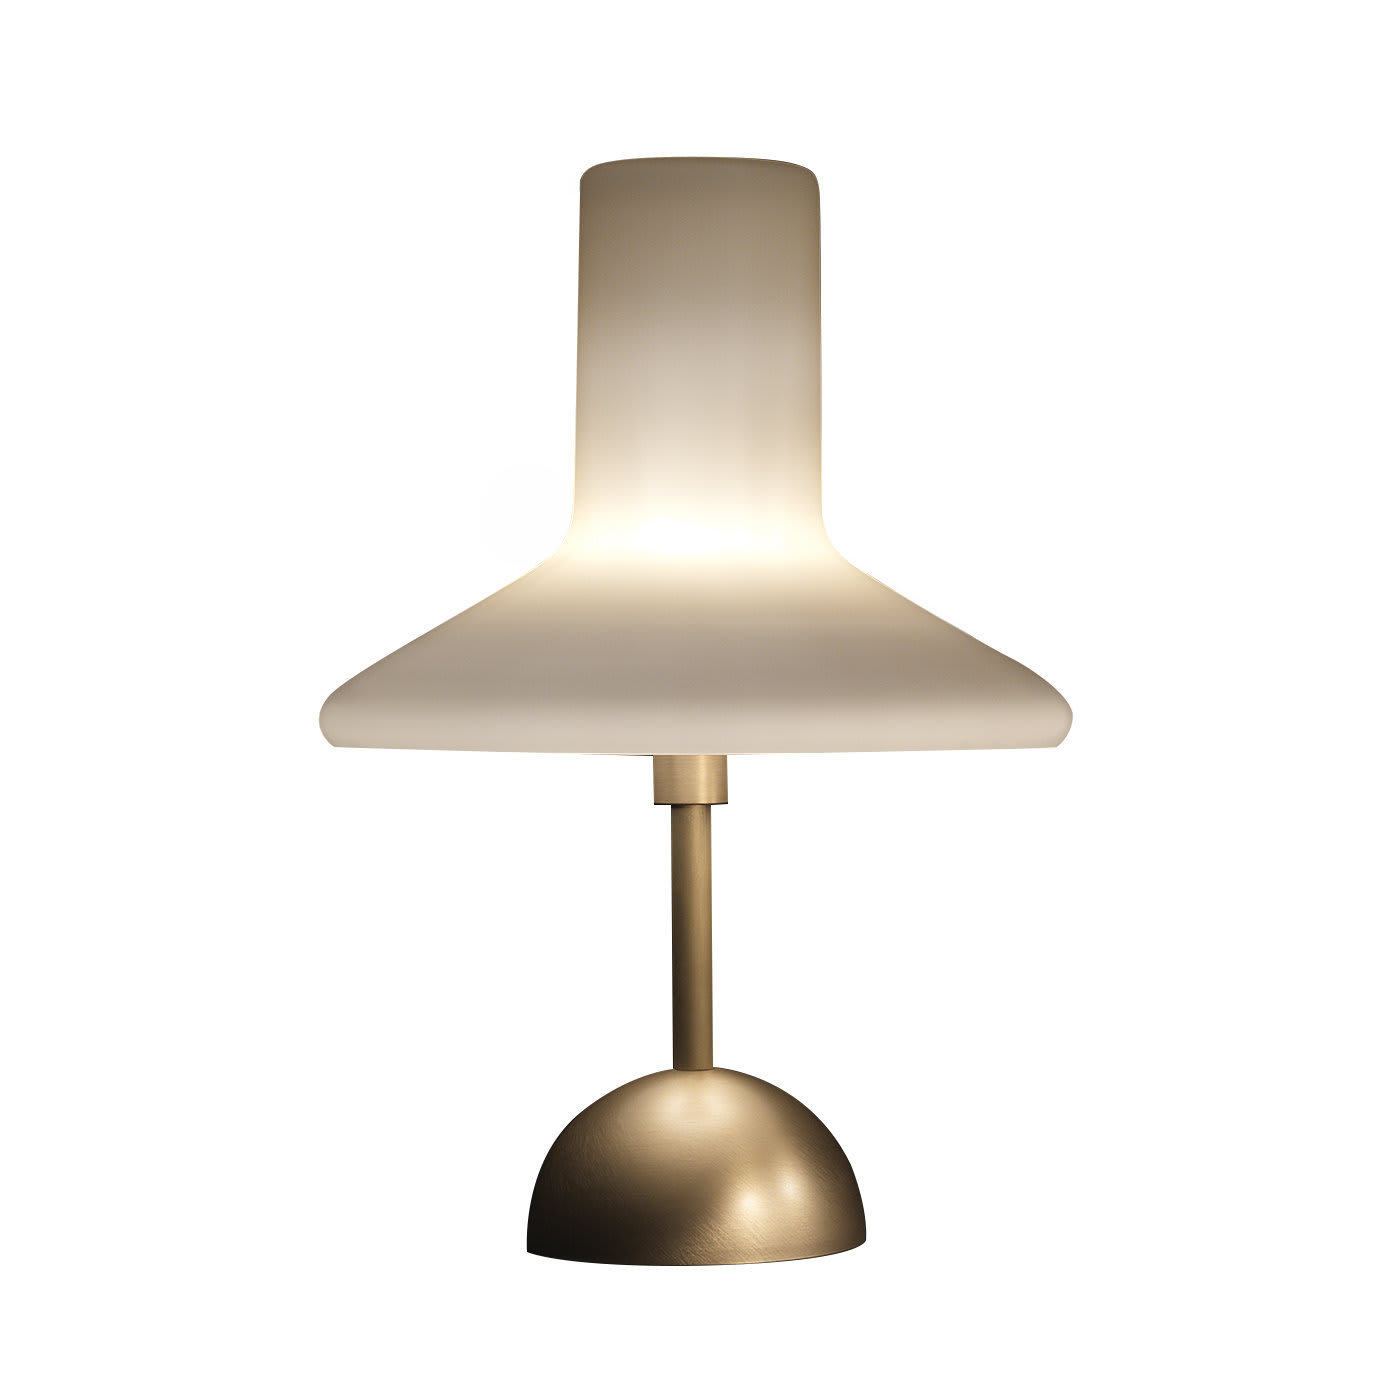 Olly Brass Large Table Lamp - Tato